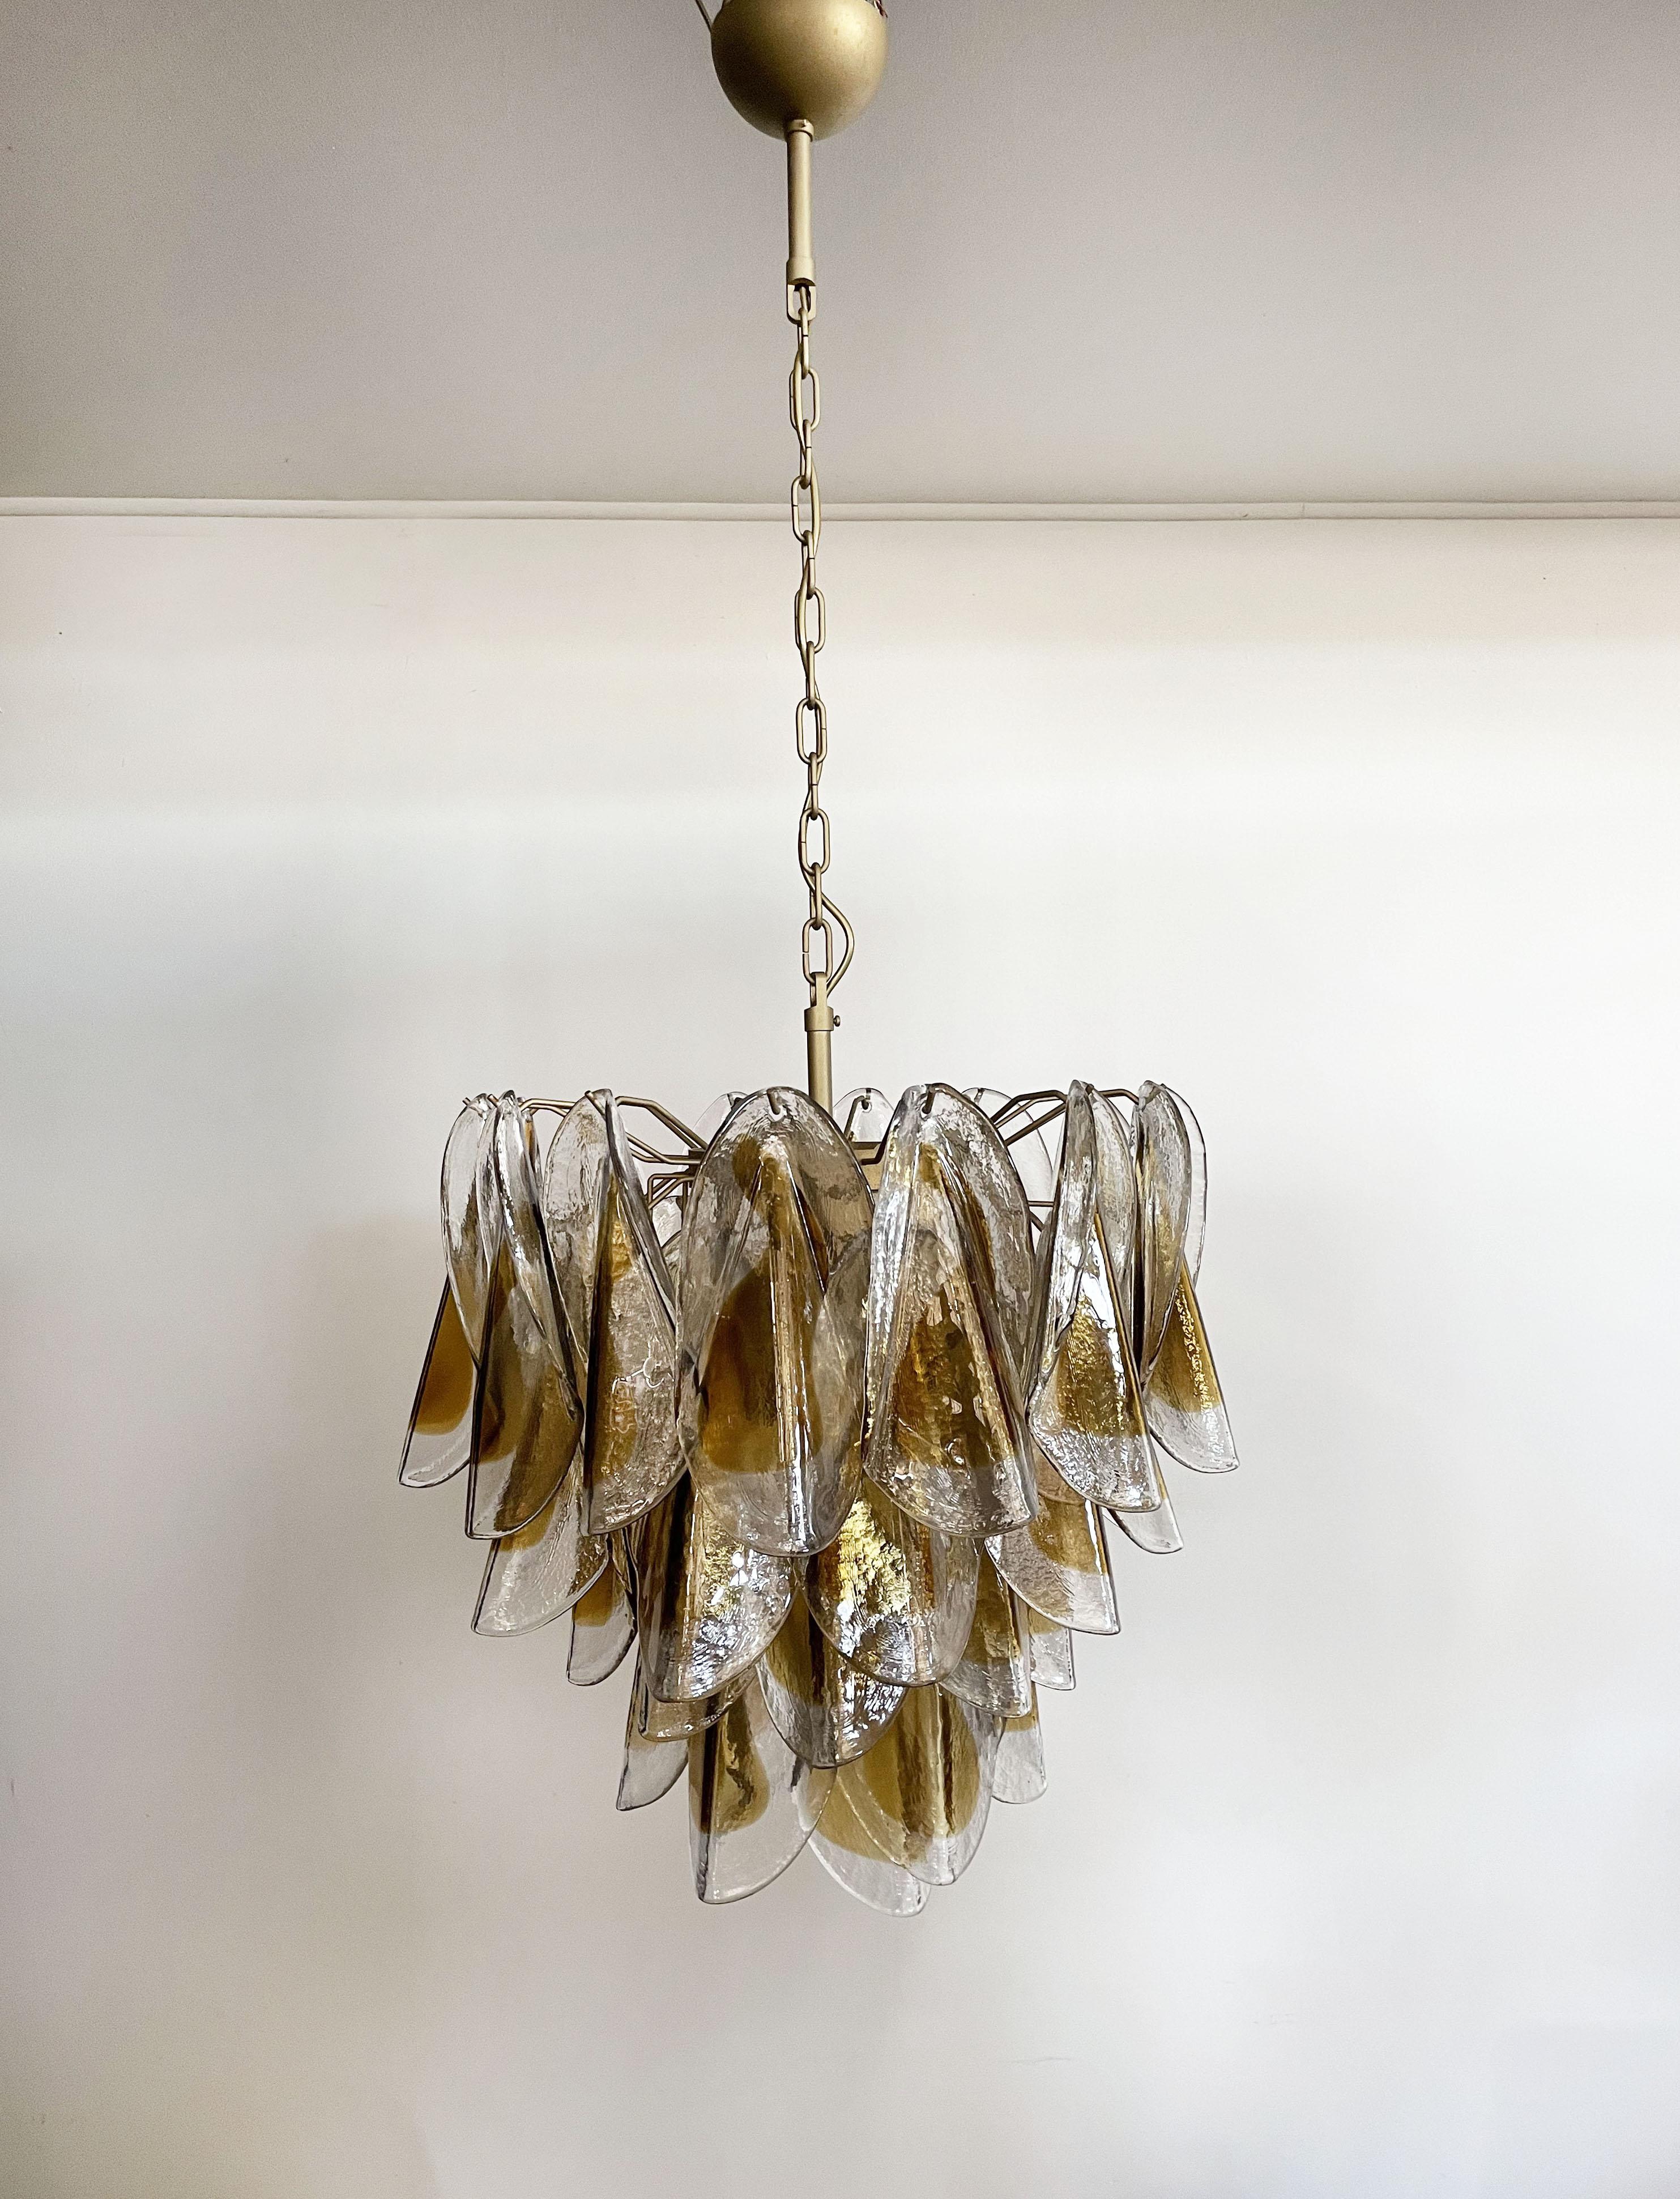 Rare Italian vintage Murano chandelier.  The fixture is made up of 41 individual handblown glass elements hanging (transparent and amber) from a gold painted metal frame. Each piece clear with amber centre.
Period: late XX century
Dimensions: 47,25